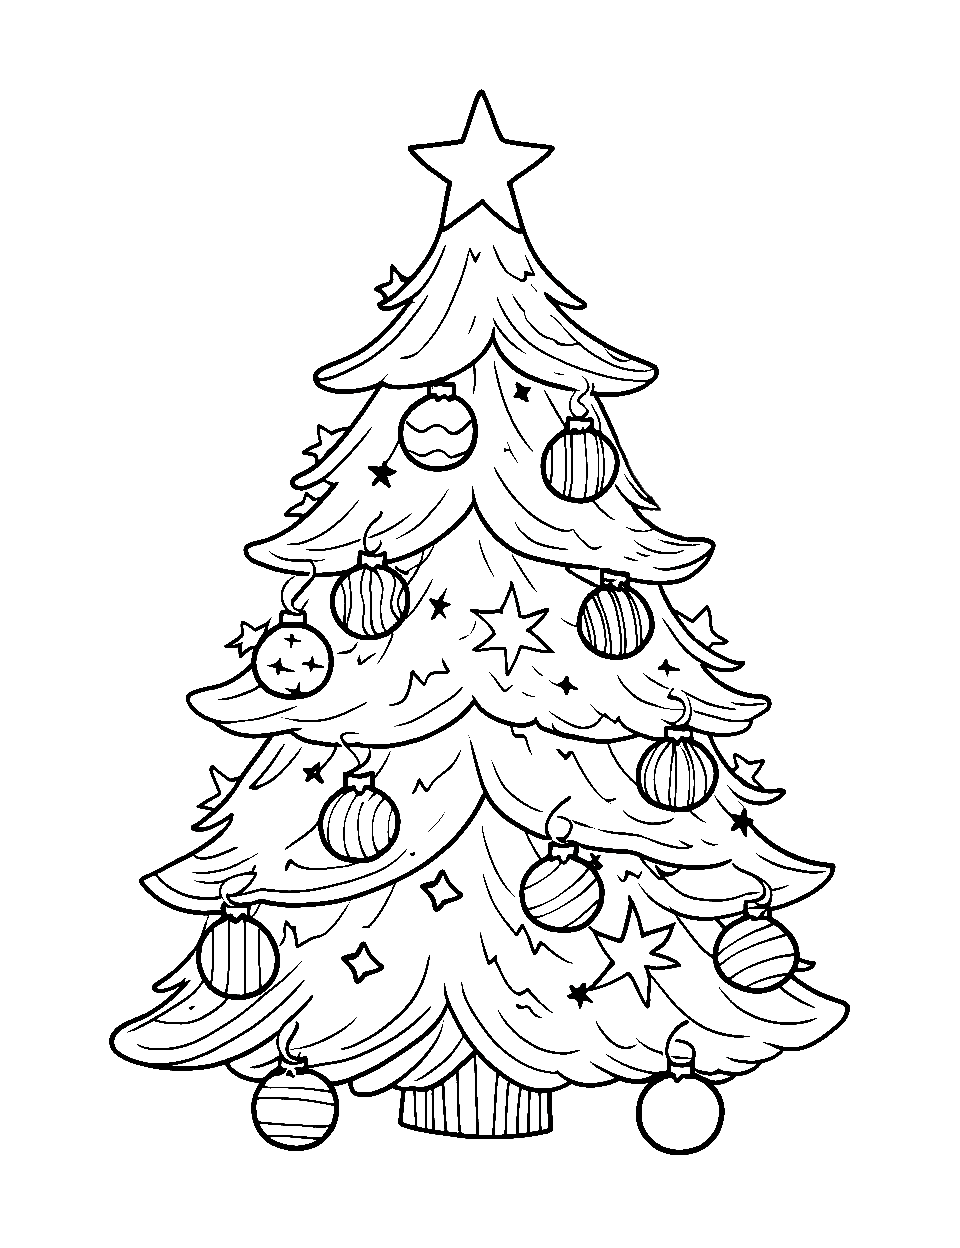 Detailed Christmas Ornaments Coloring Page - A Christmas tree with detailed ornaments and a bright shining star at the top.